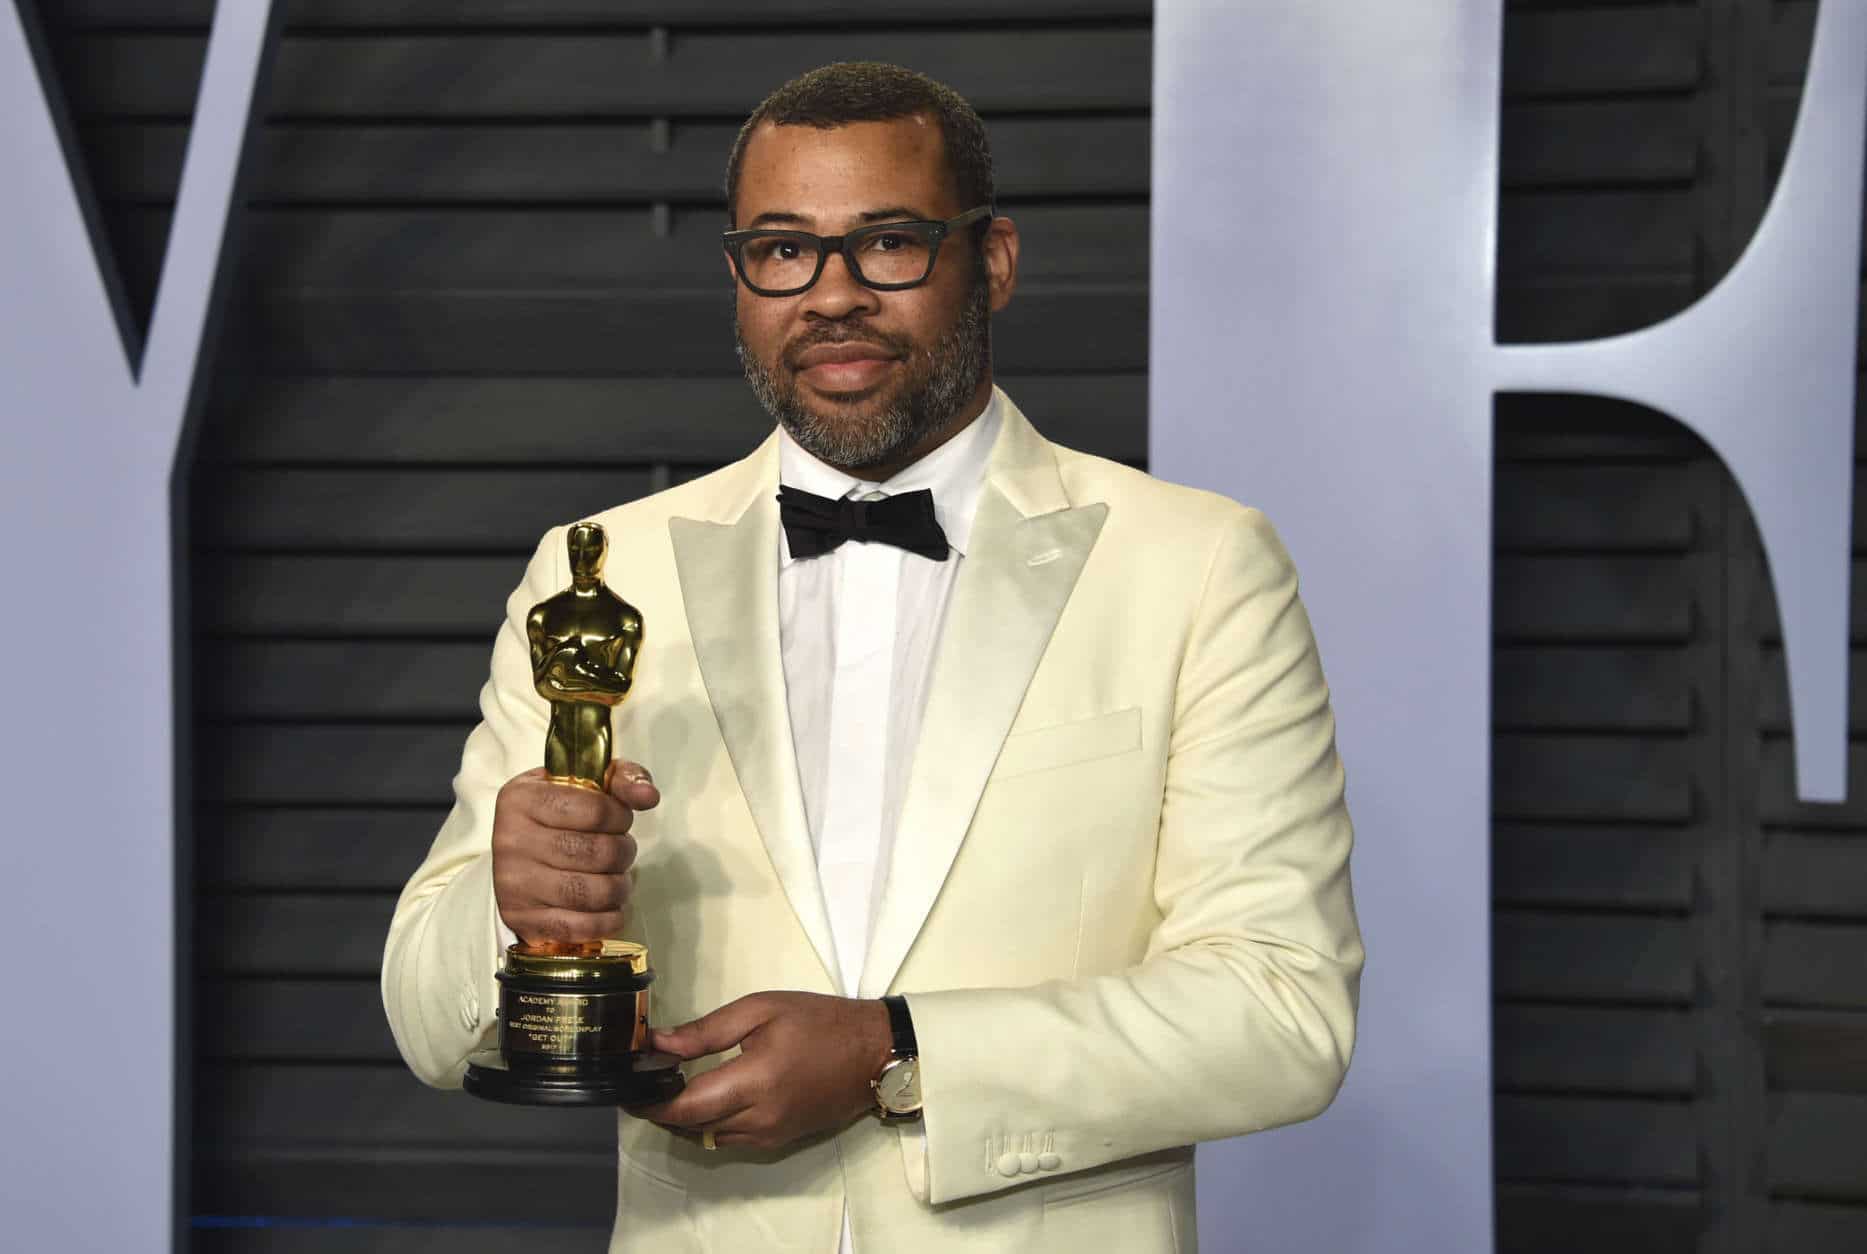 Jordan Peele, winner of the award for best original screenplay for "Get Out," arrives at the Vanity Fair Oscar Party on Sunday, March 4, 2018, in Beverly Hills, Calif. (Photo by Evan Agostini/Invision/AP)